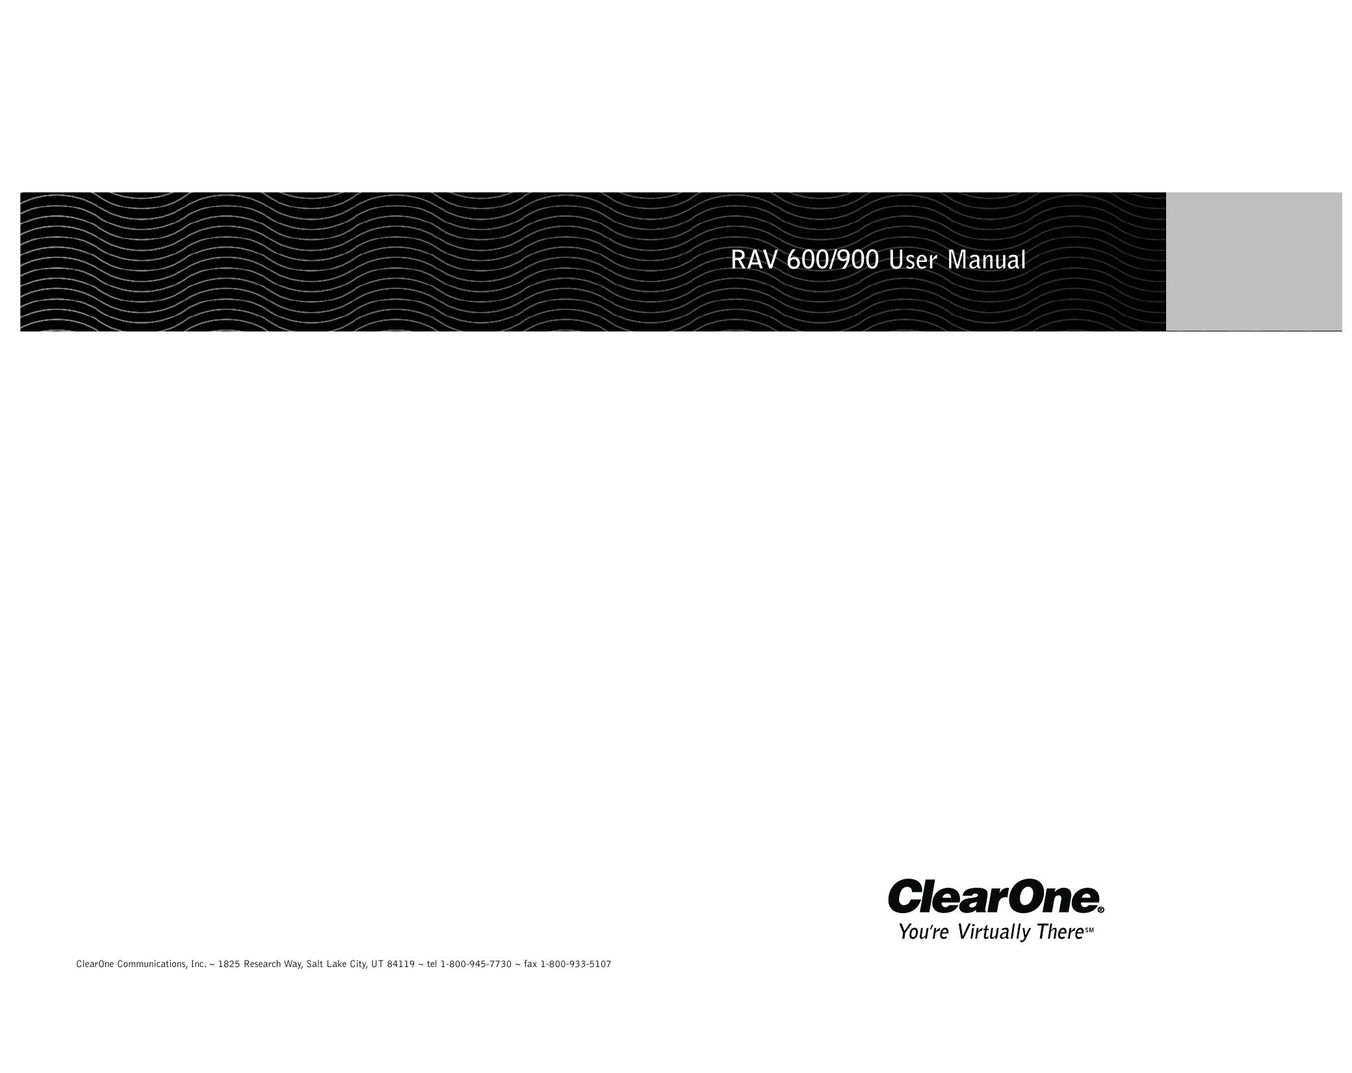 ClearOne comm 600/900 Cell Phone User Manual